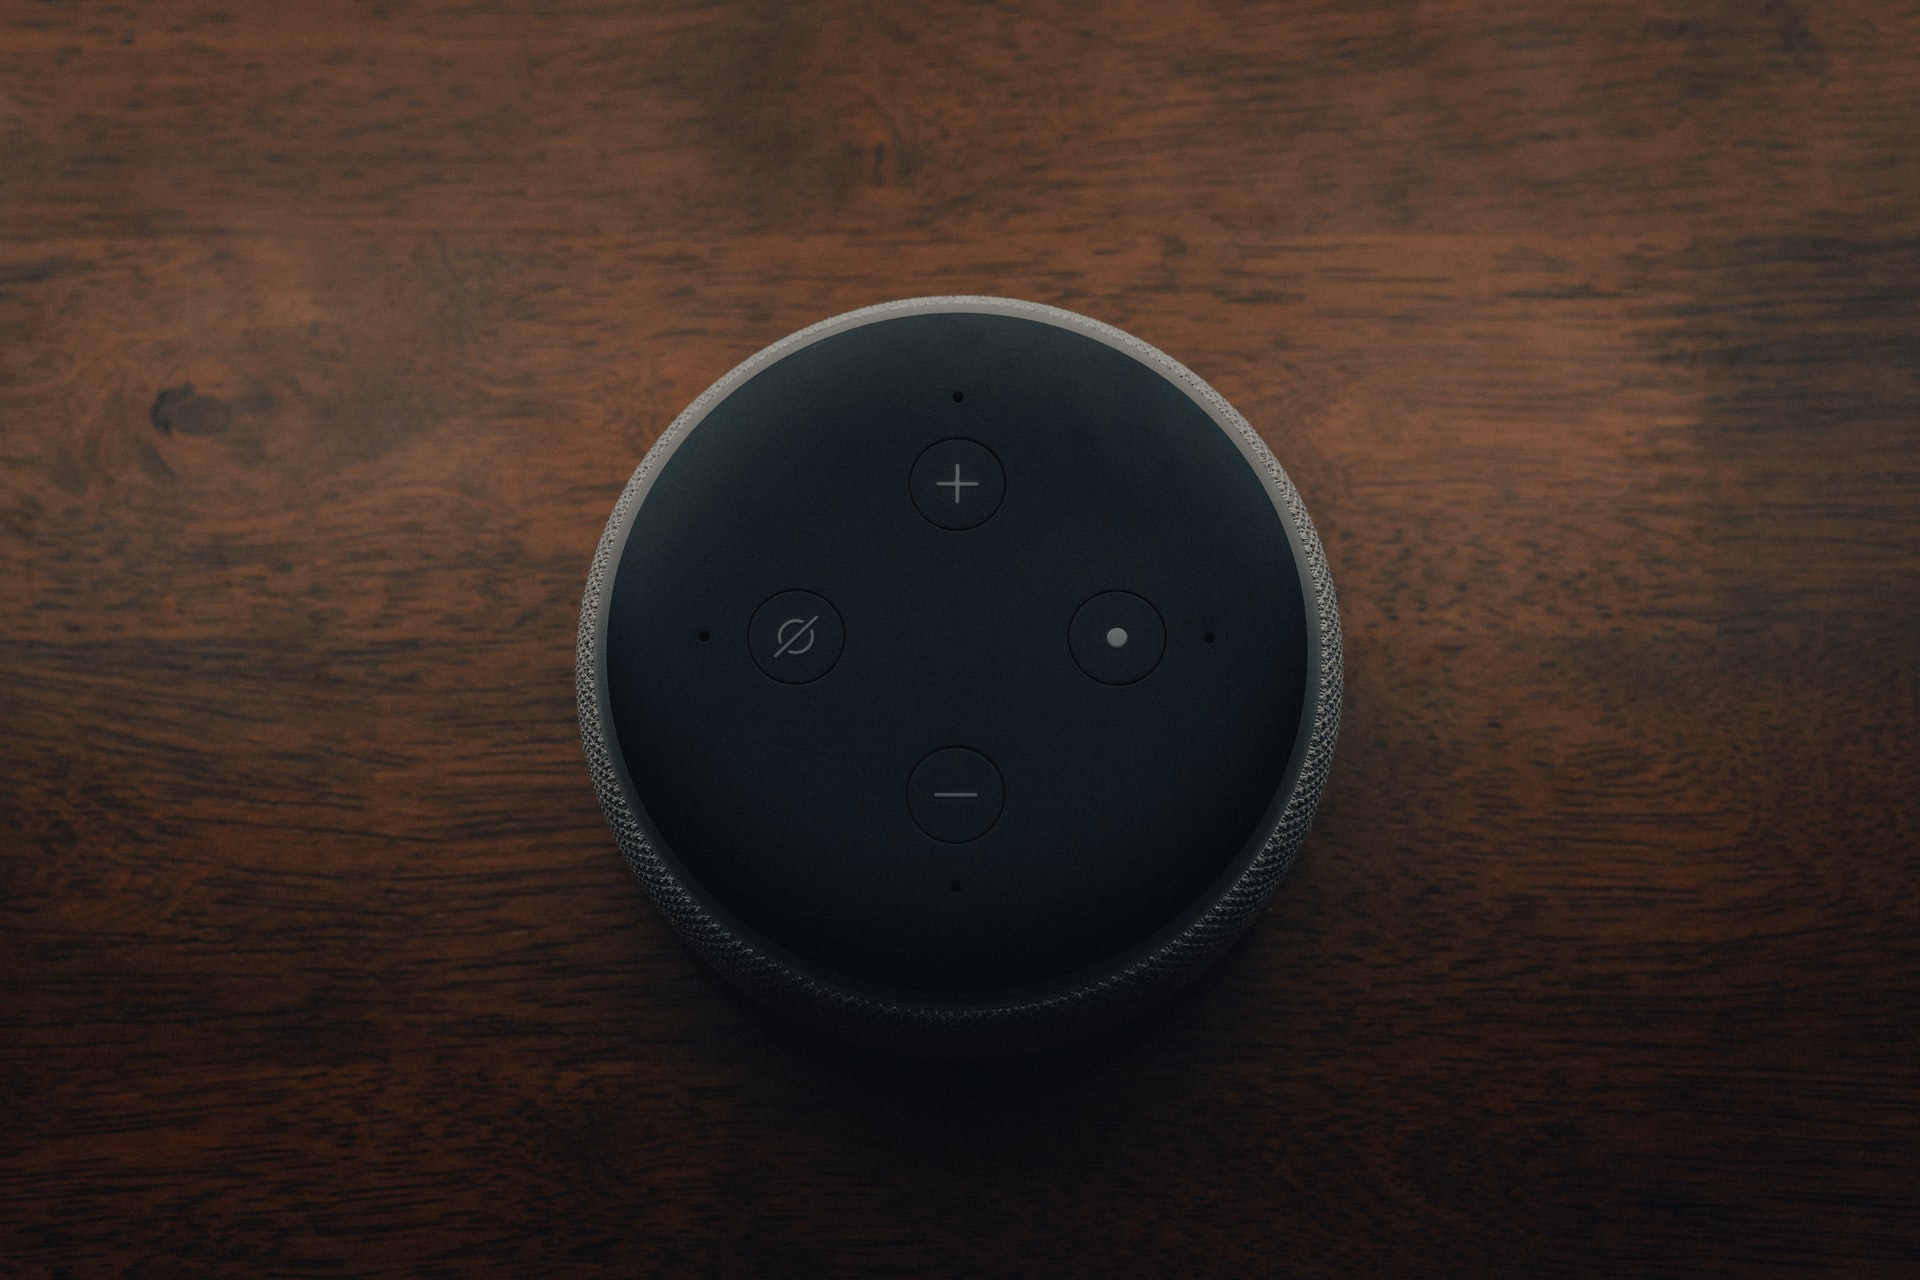 Amazon Alexa – who is it and what can it control?